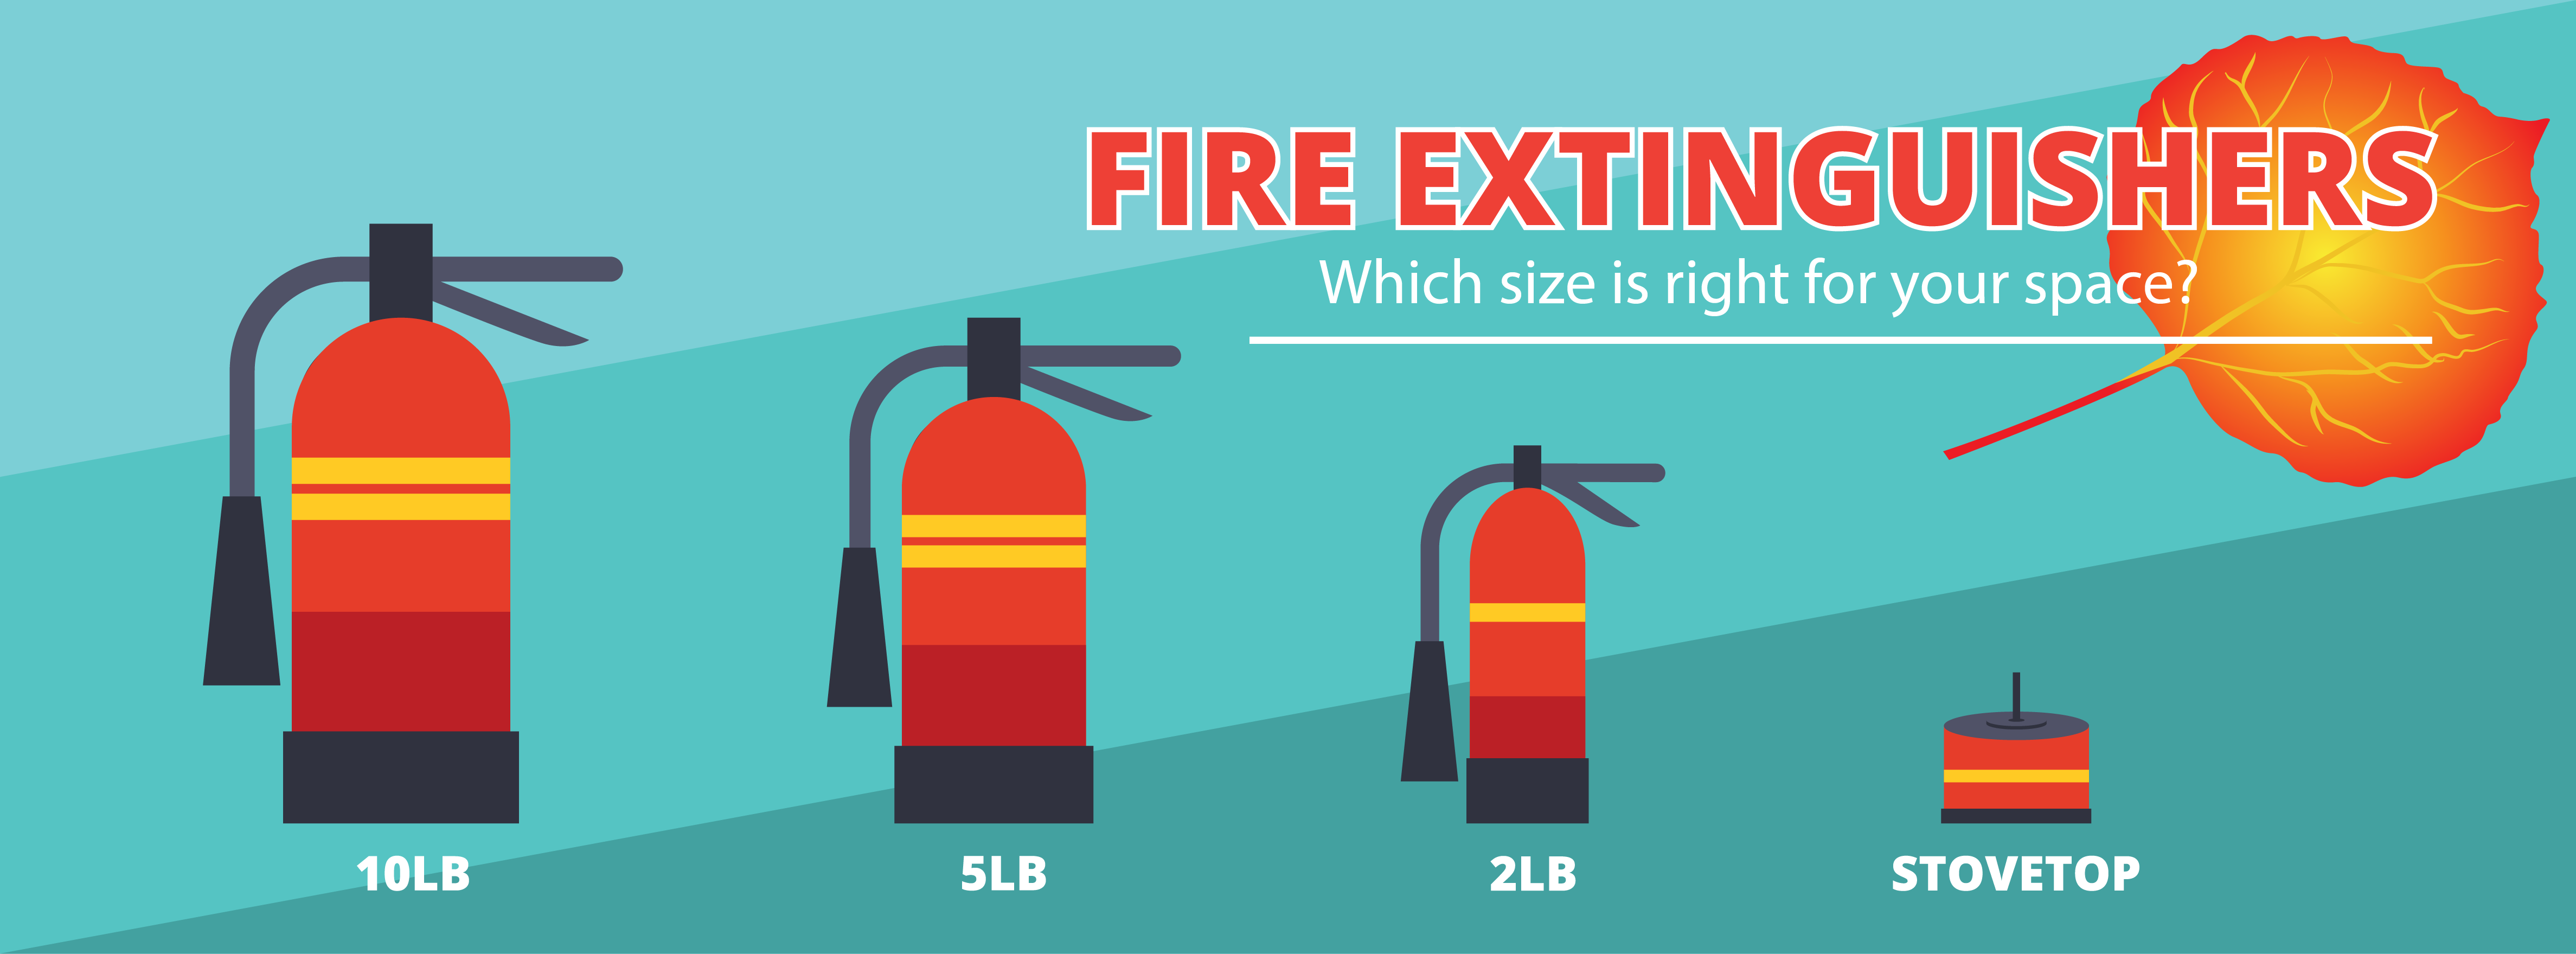 Fire Extinguishers - Which size is right for your space?